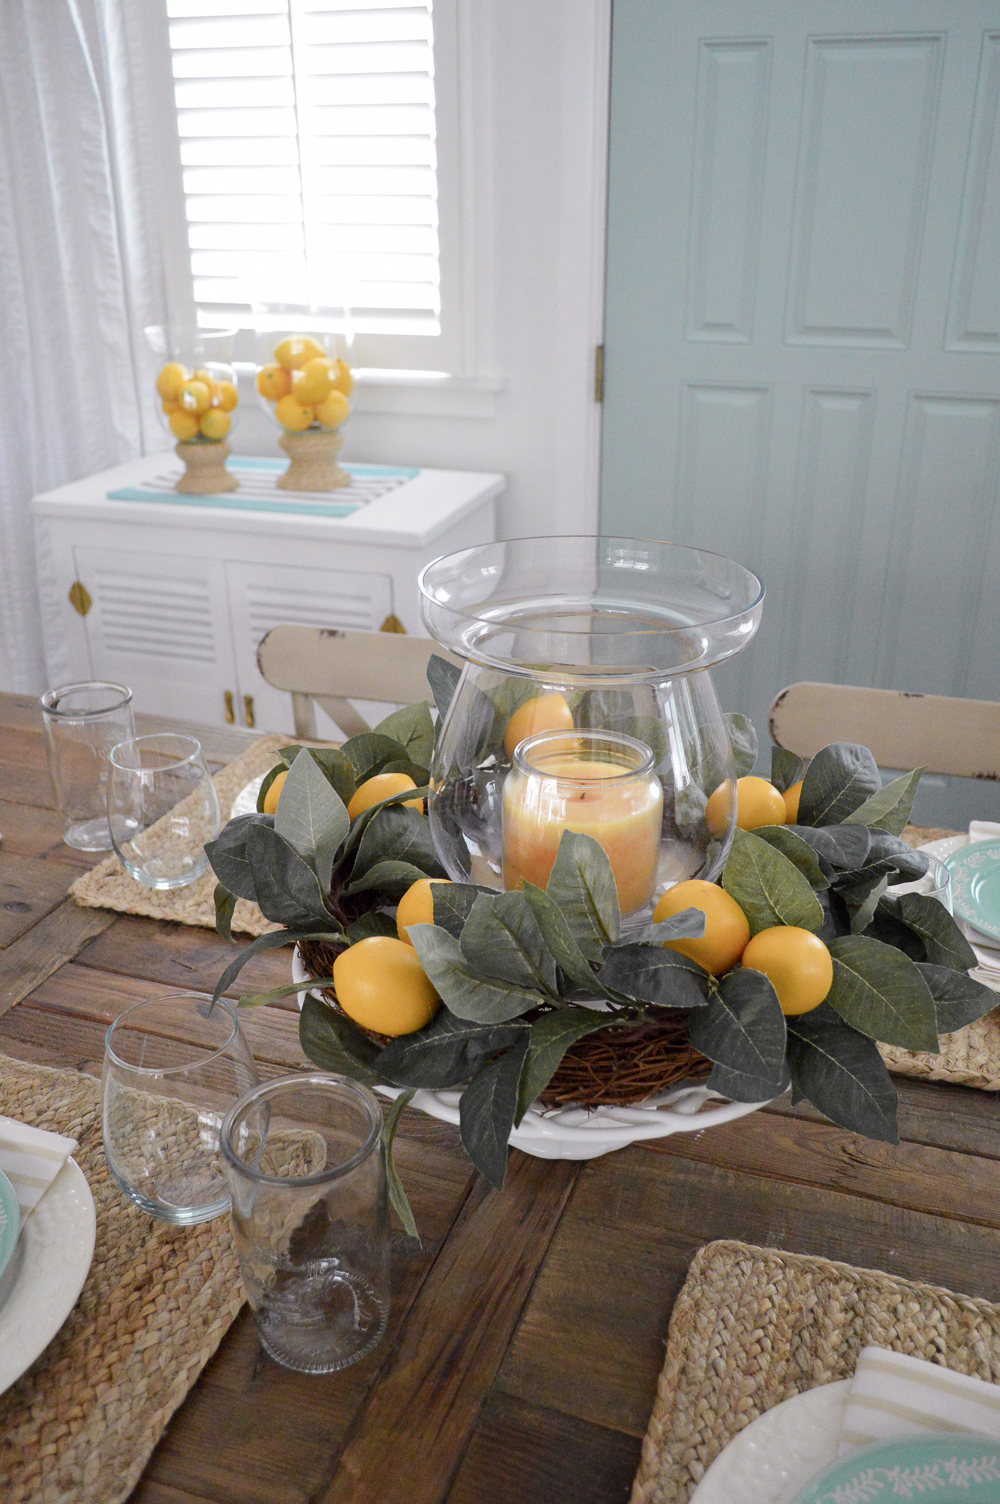 Fascinating Lemon Decor Ideas That Are So Cheap To Make Page 3 of 3